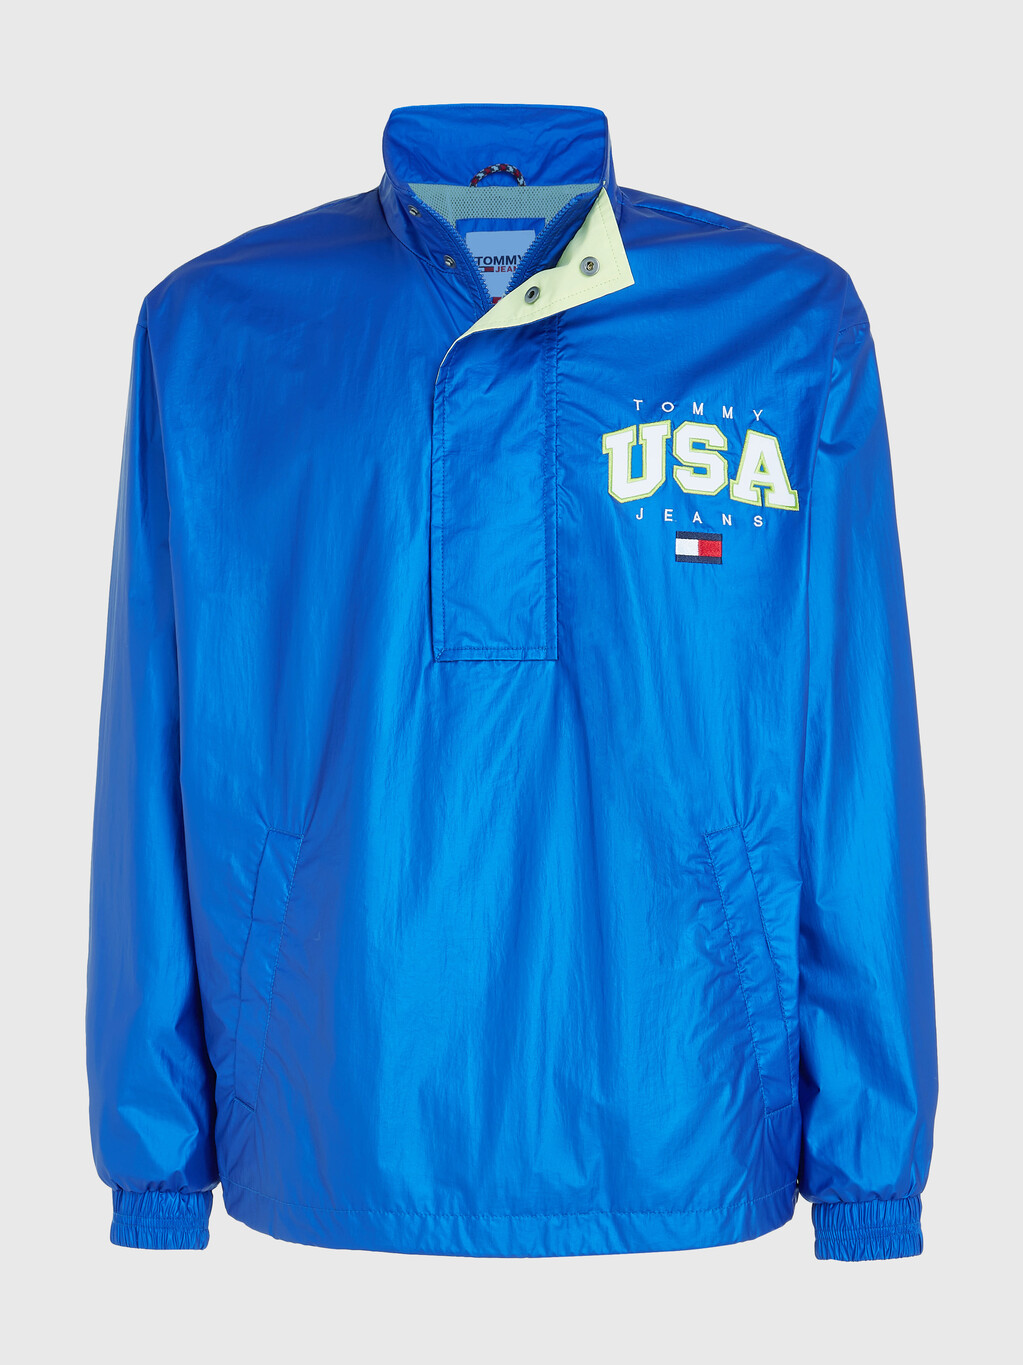 Relaxed Metallic Popover Jacket, Ultra Blue, hi-res